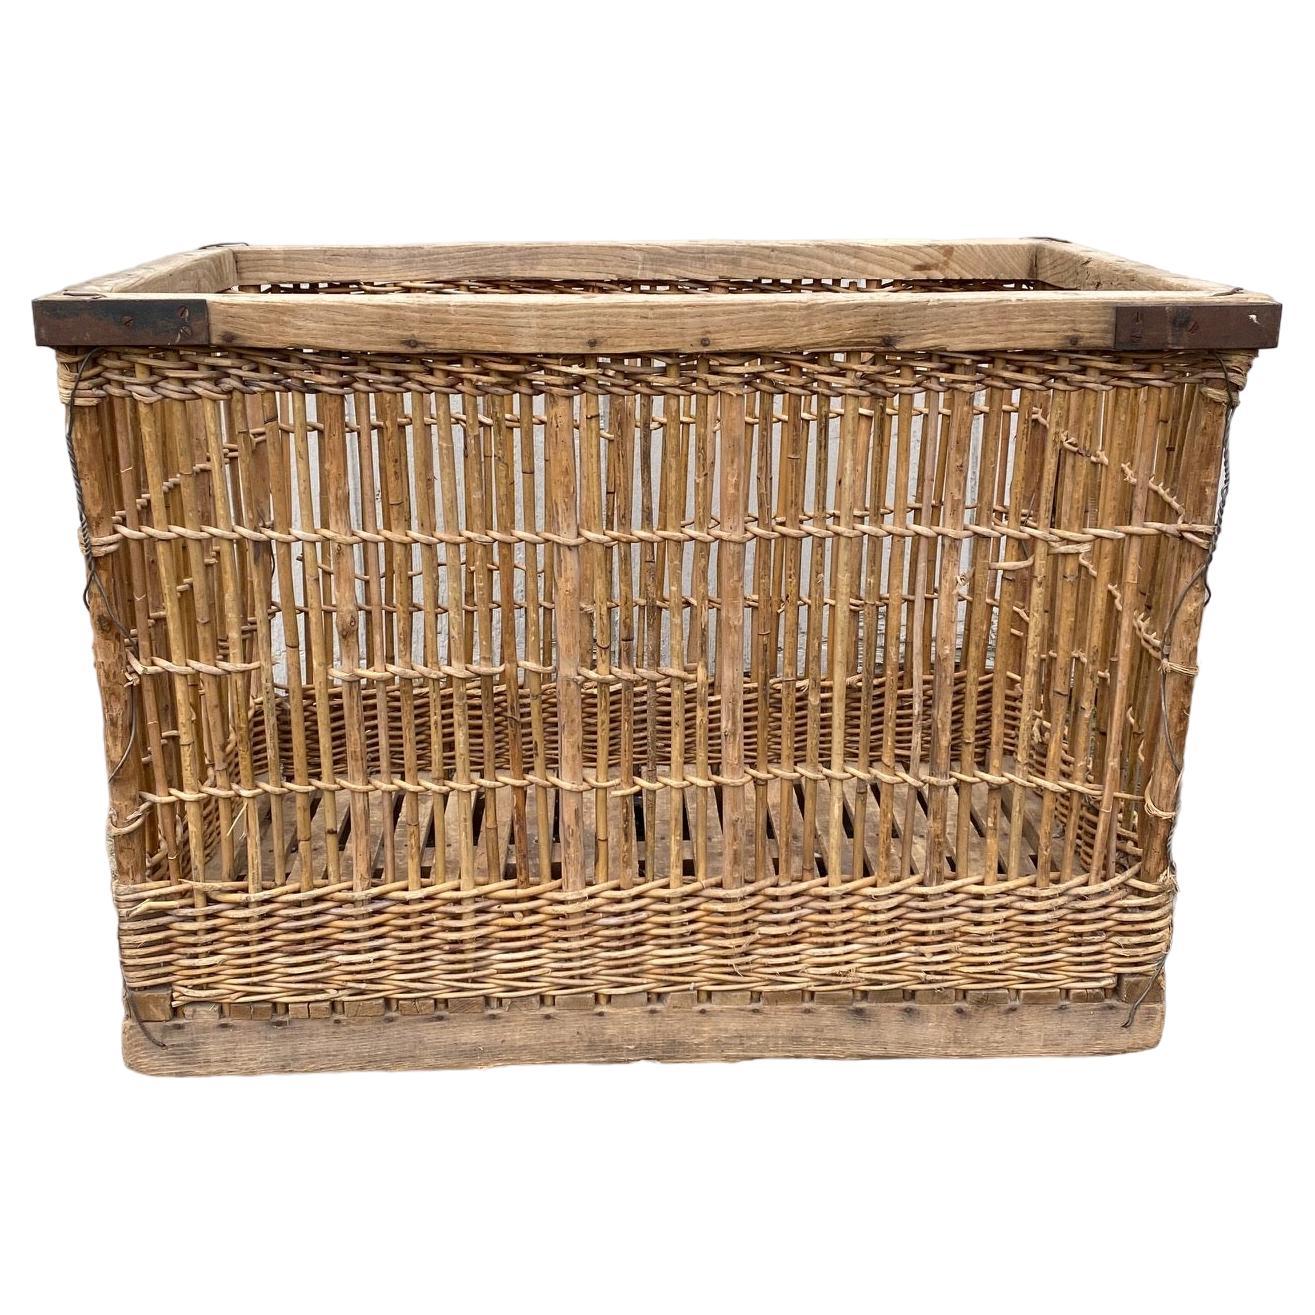  French Very Large Boulangerie or Bakery Industrial Woven Cart Basket on Wheels